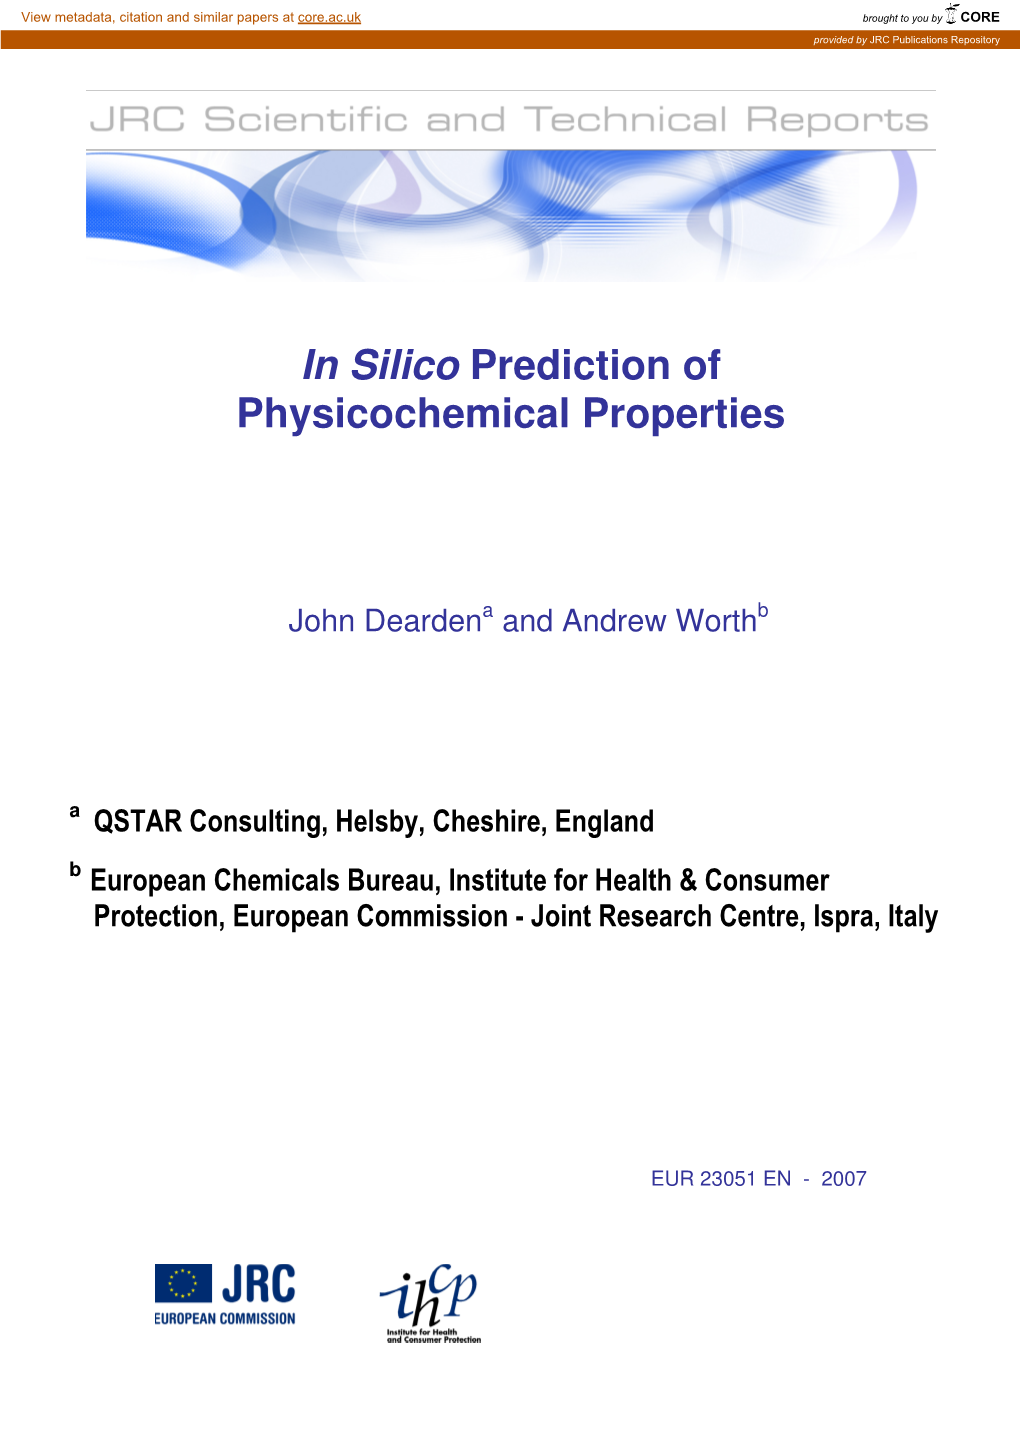 In Silico Prediction of Physicochemical Properties